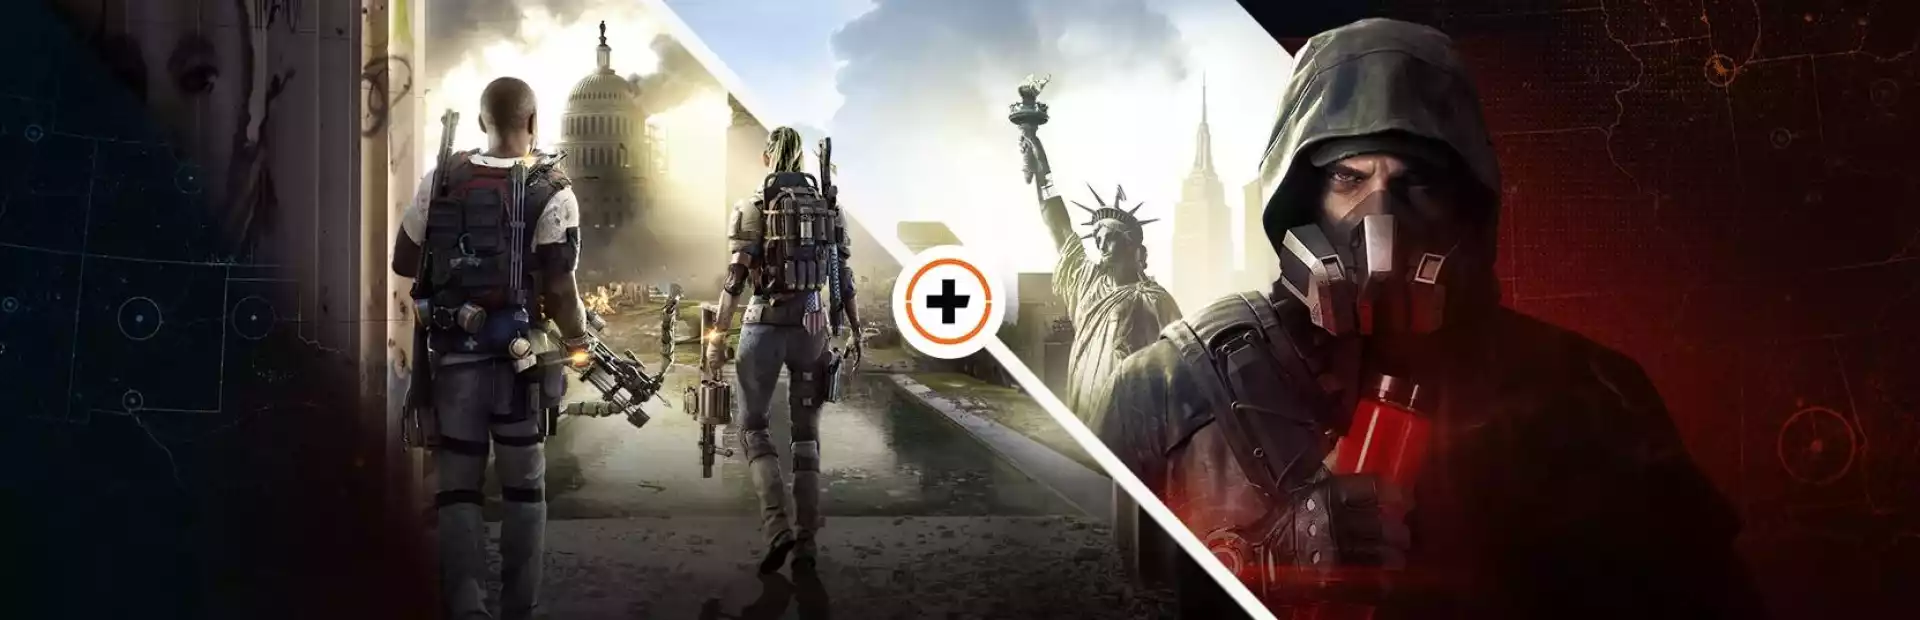 Tom Clancy's The Division 2 ﻿Warlords of New York Ultimate Edition Uplay Key China